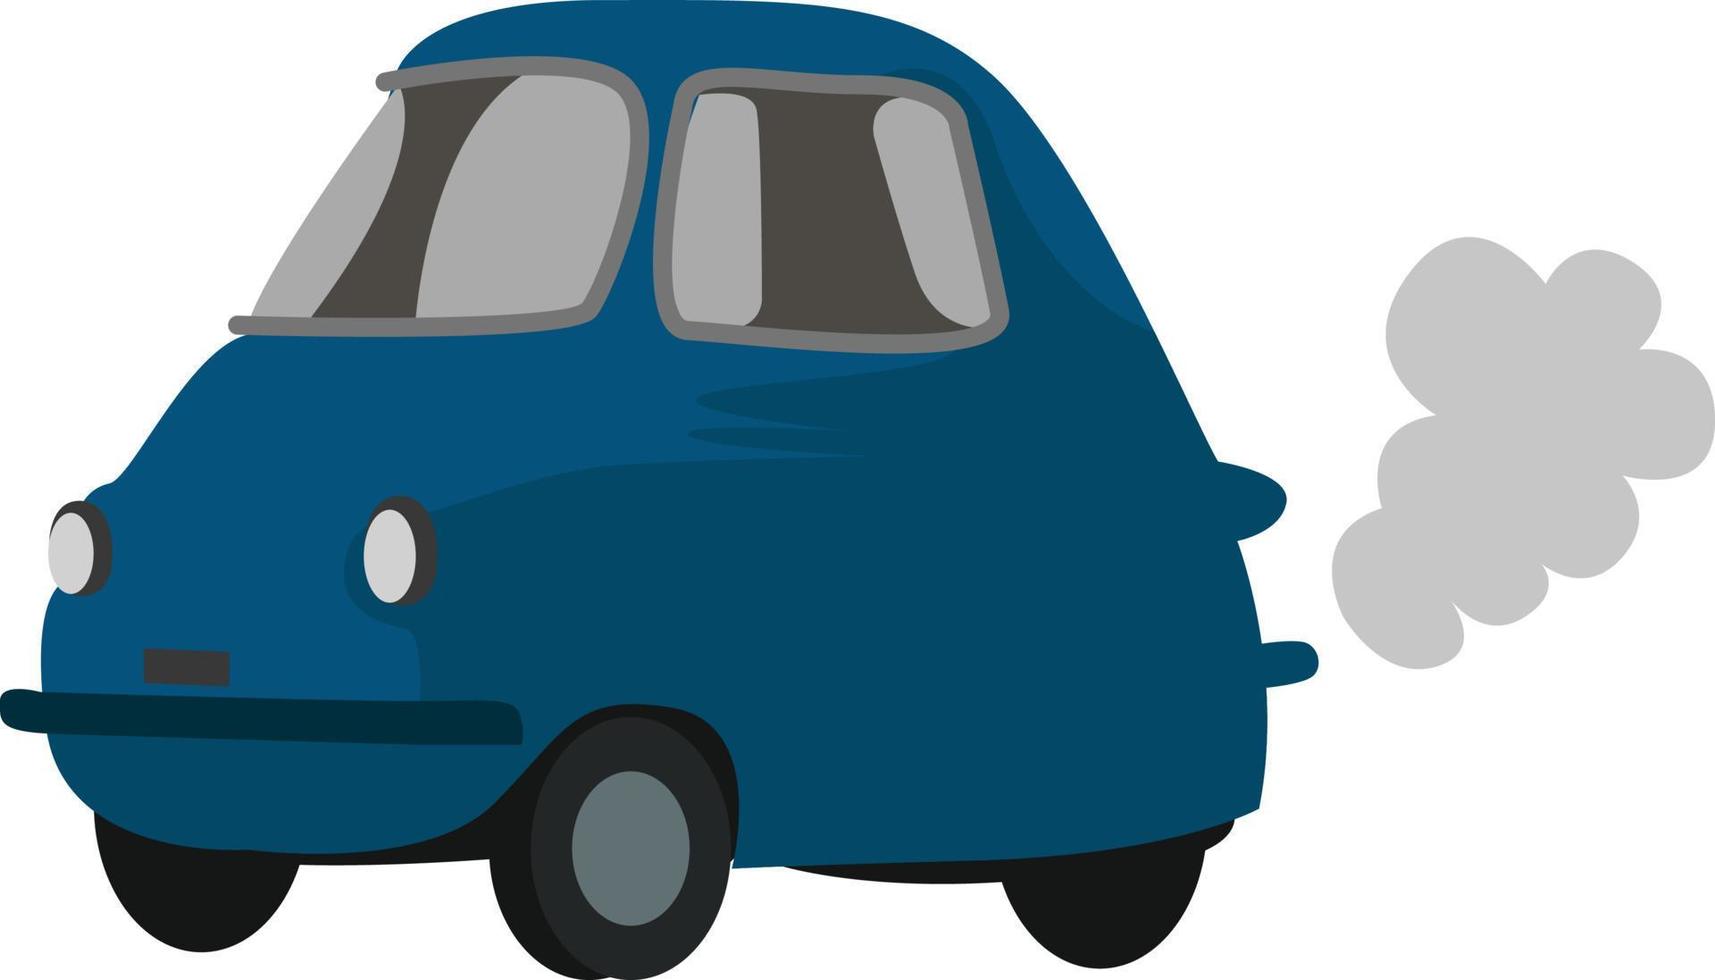 Small blue car, illustration, vector on white background